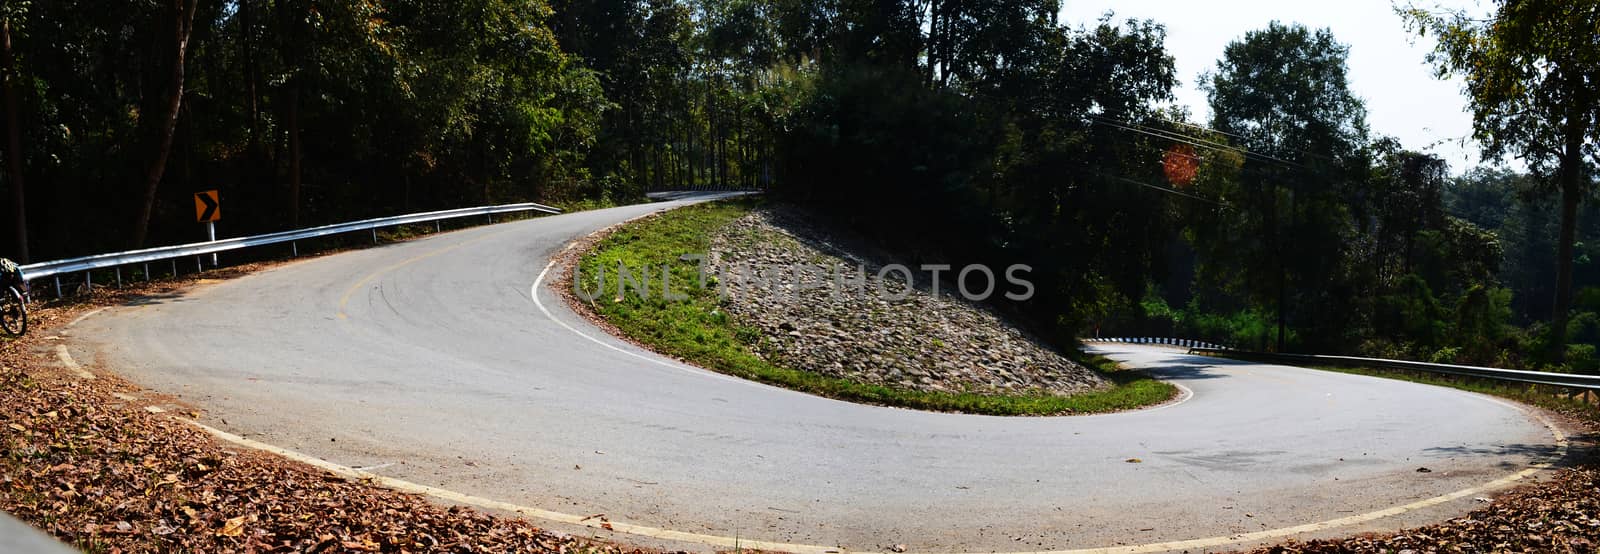 Bicycle on Slope Uphill Country Asphalt Road no Autocar, Panoram by kobfujar